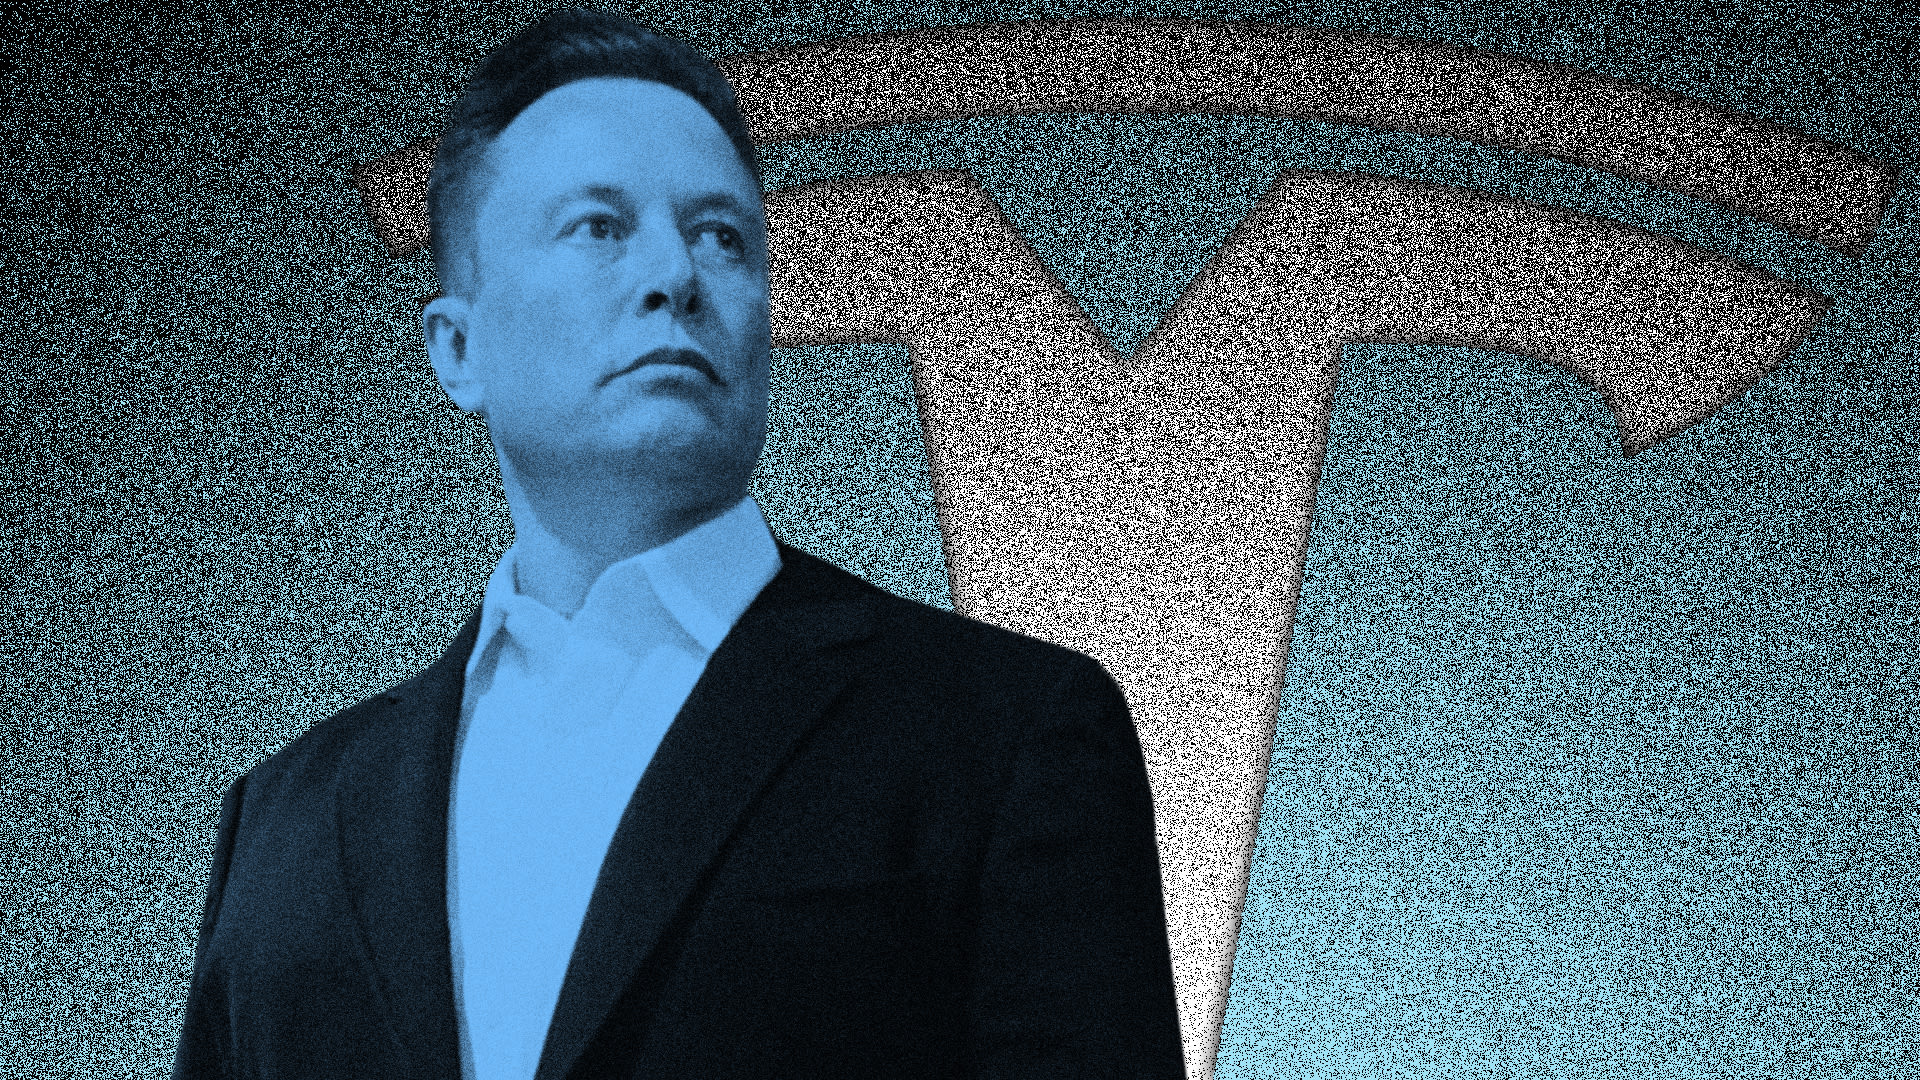 Did Elon Musk steal Tesla? Here’s why the CEO is rebutting long-time allegations on Twitter